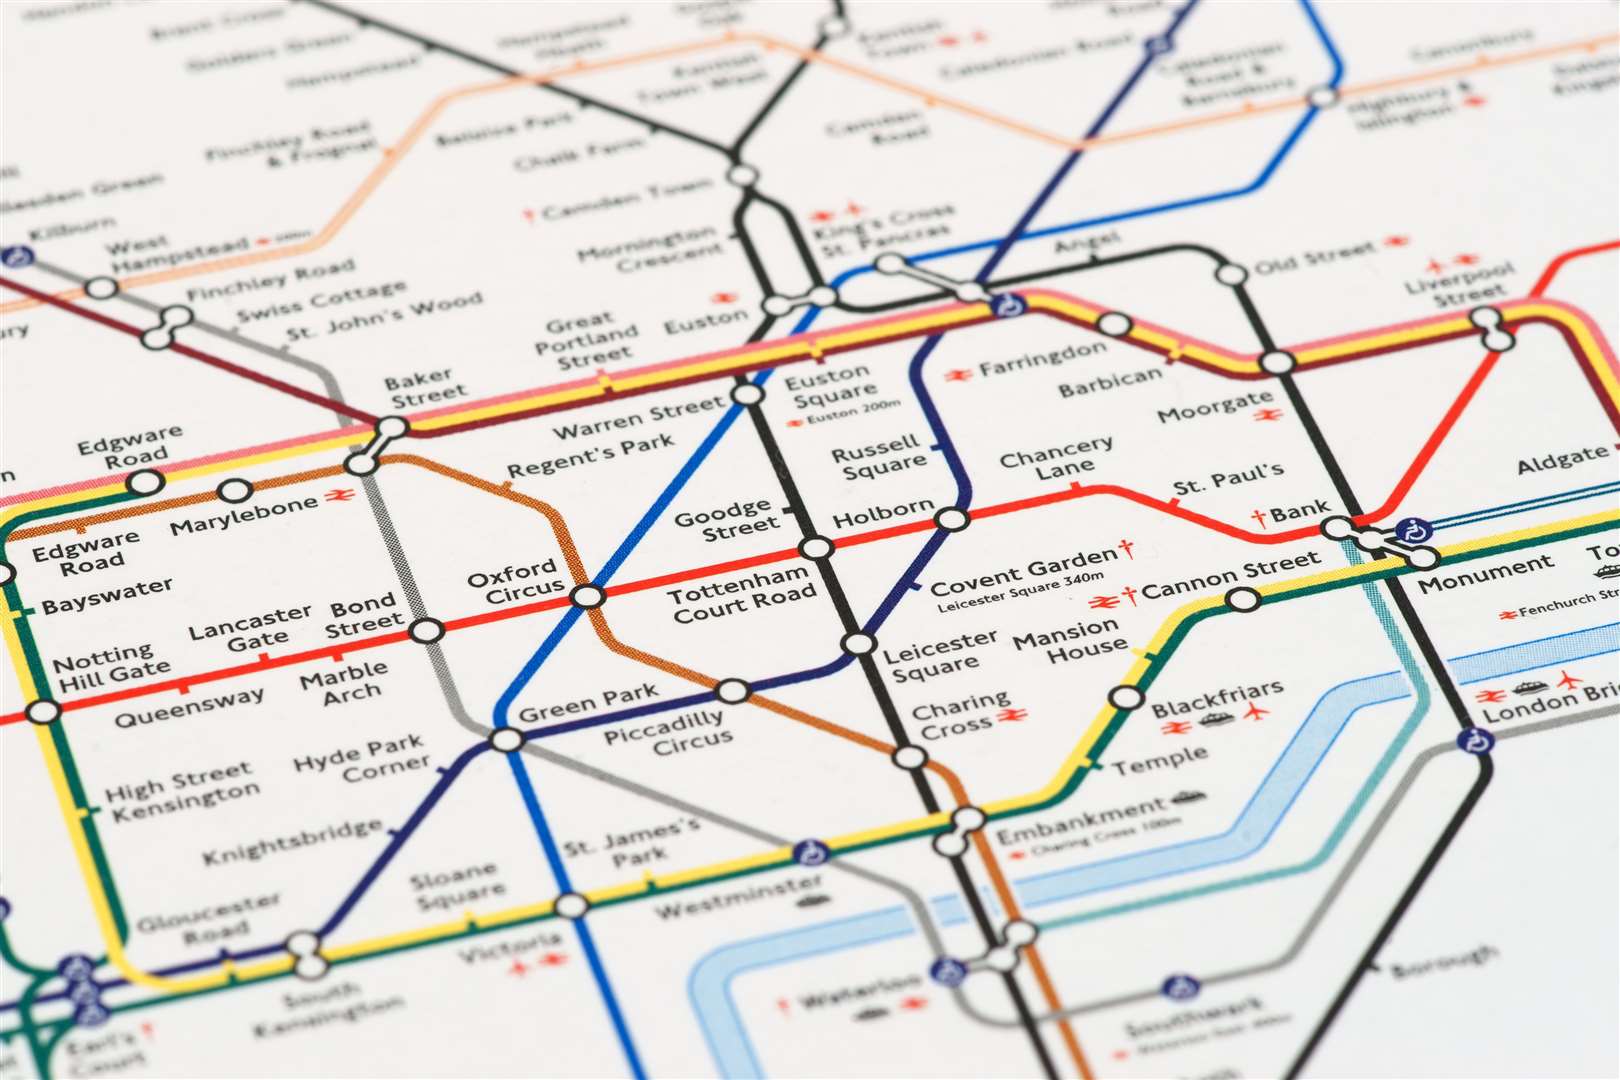 Night Tube services normally begin just after midnight. Image: iStock